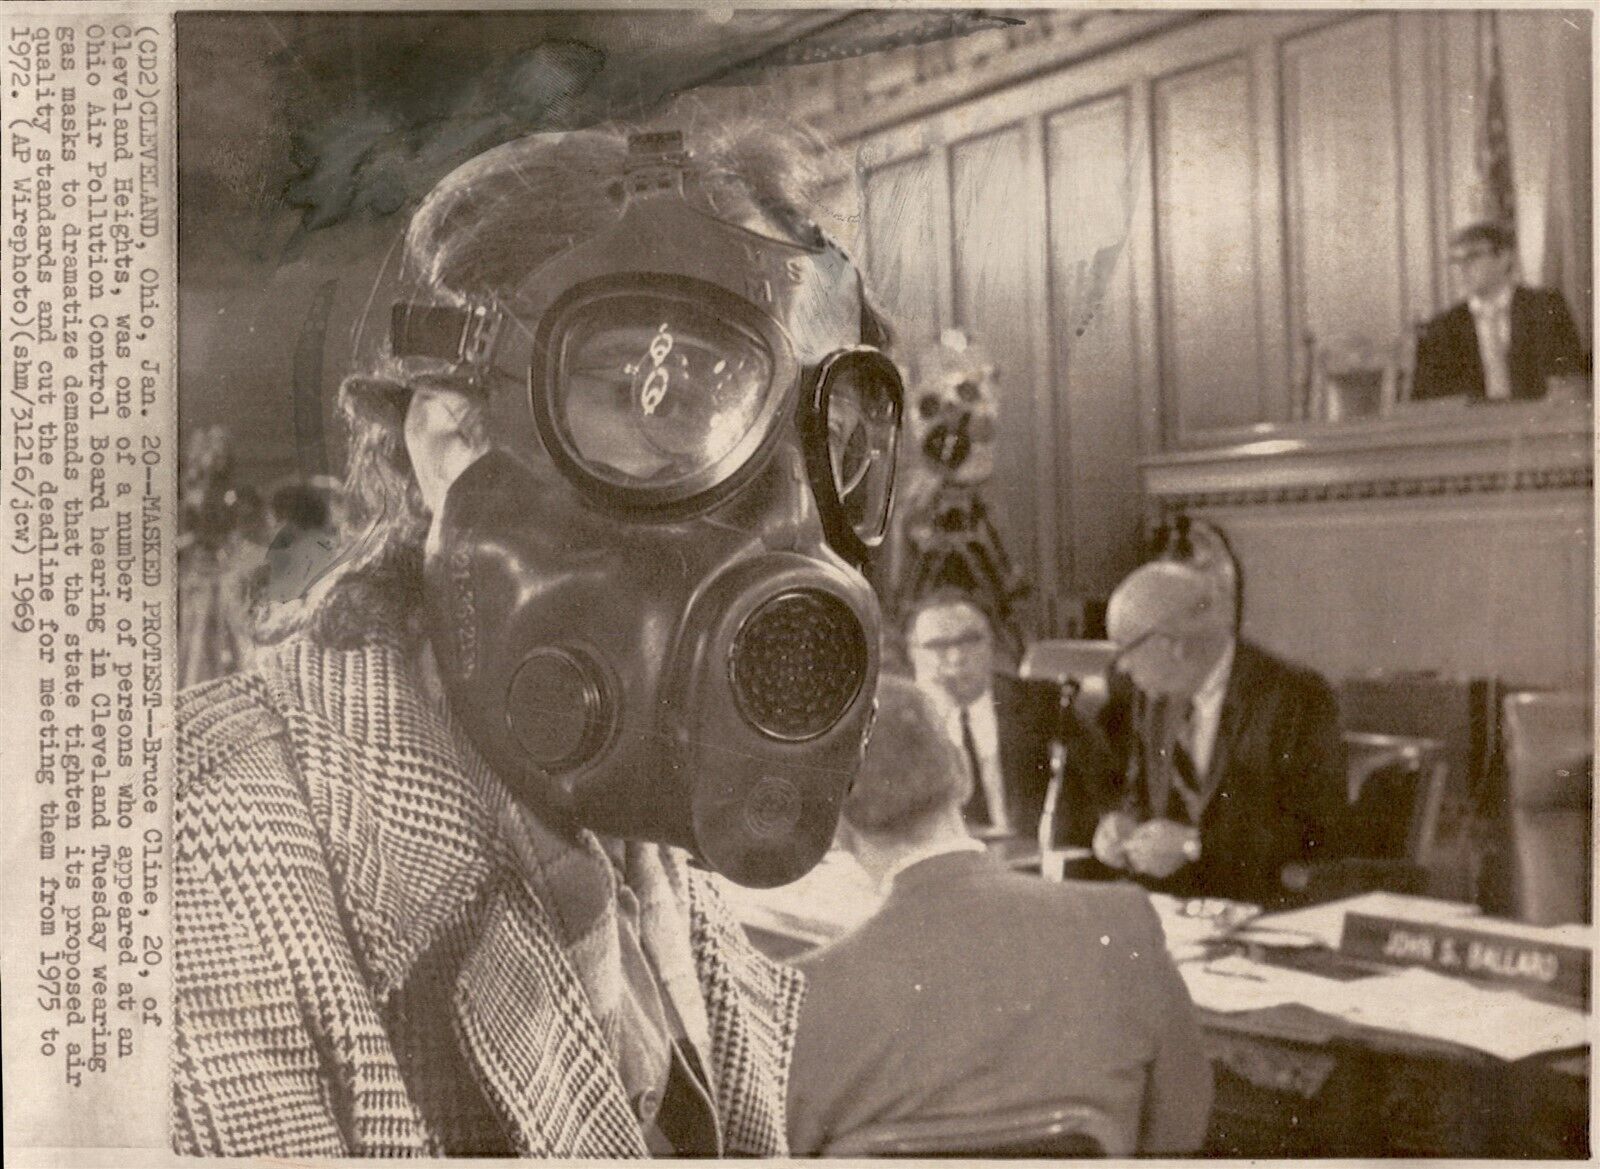 LG986 1969 AP Wire Photo MASKED PROTEST @ OHIO AIR POLLUTION HEARING GAS MASK